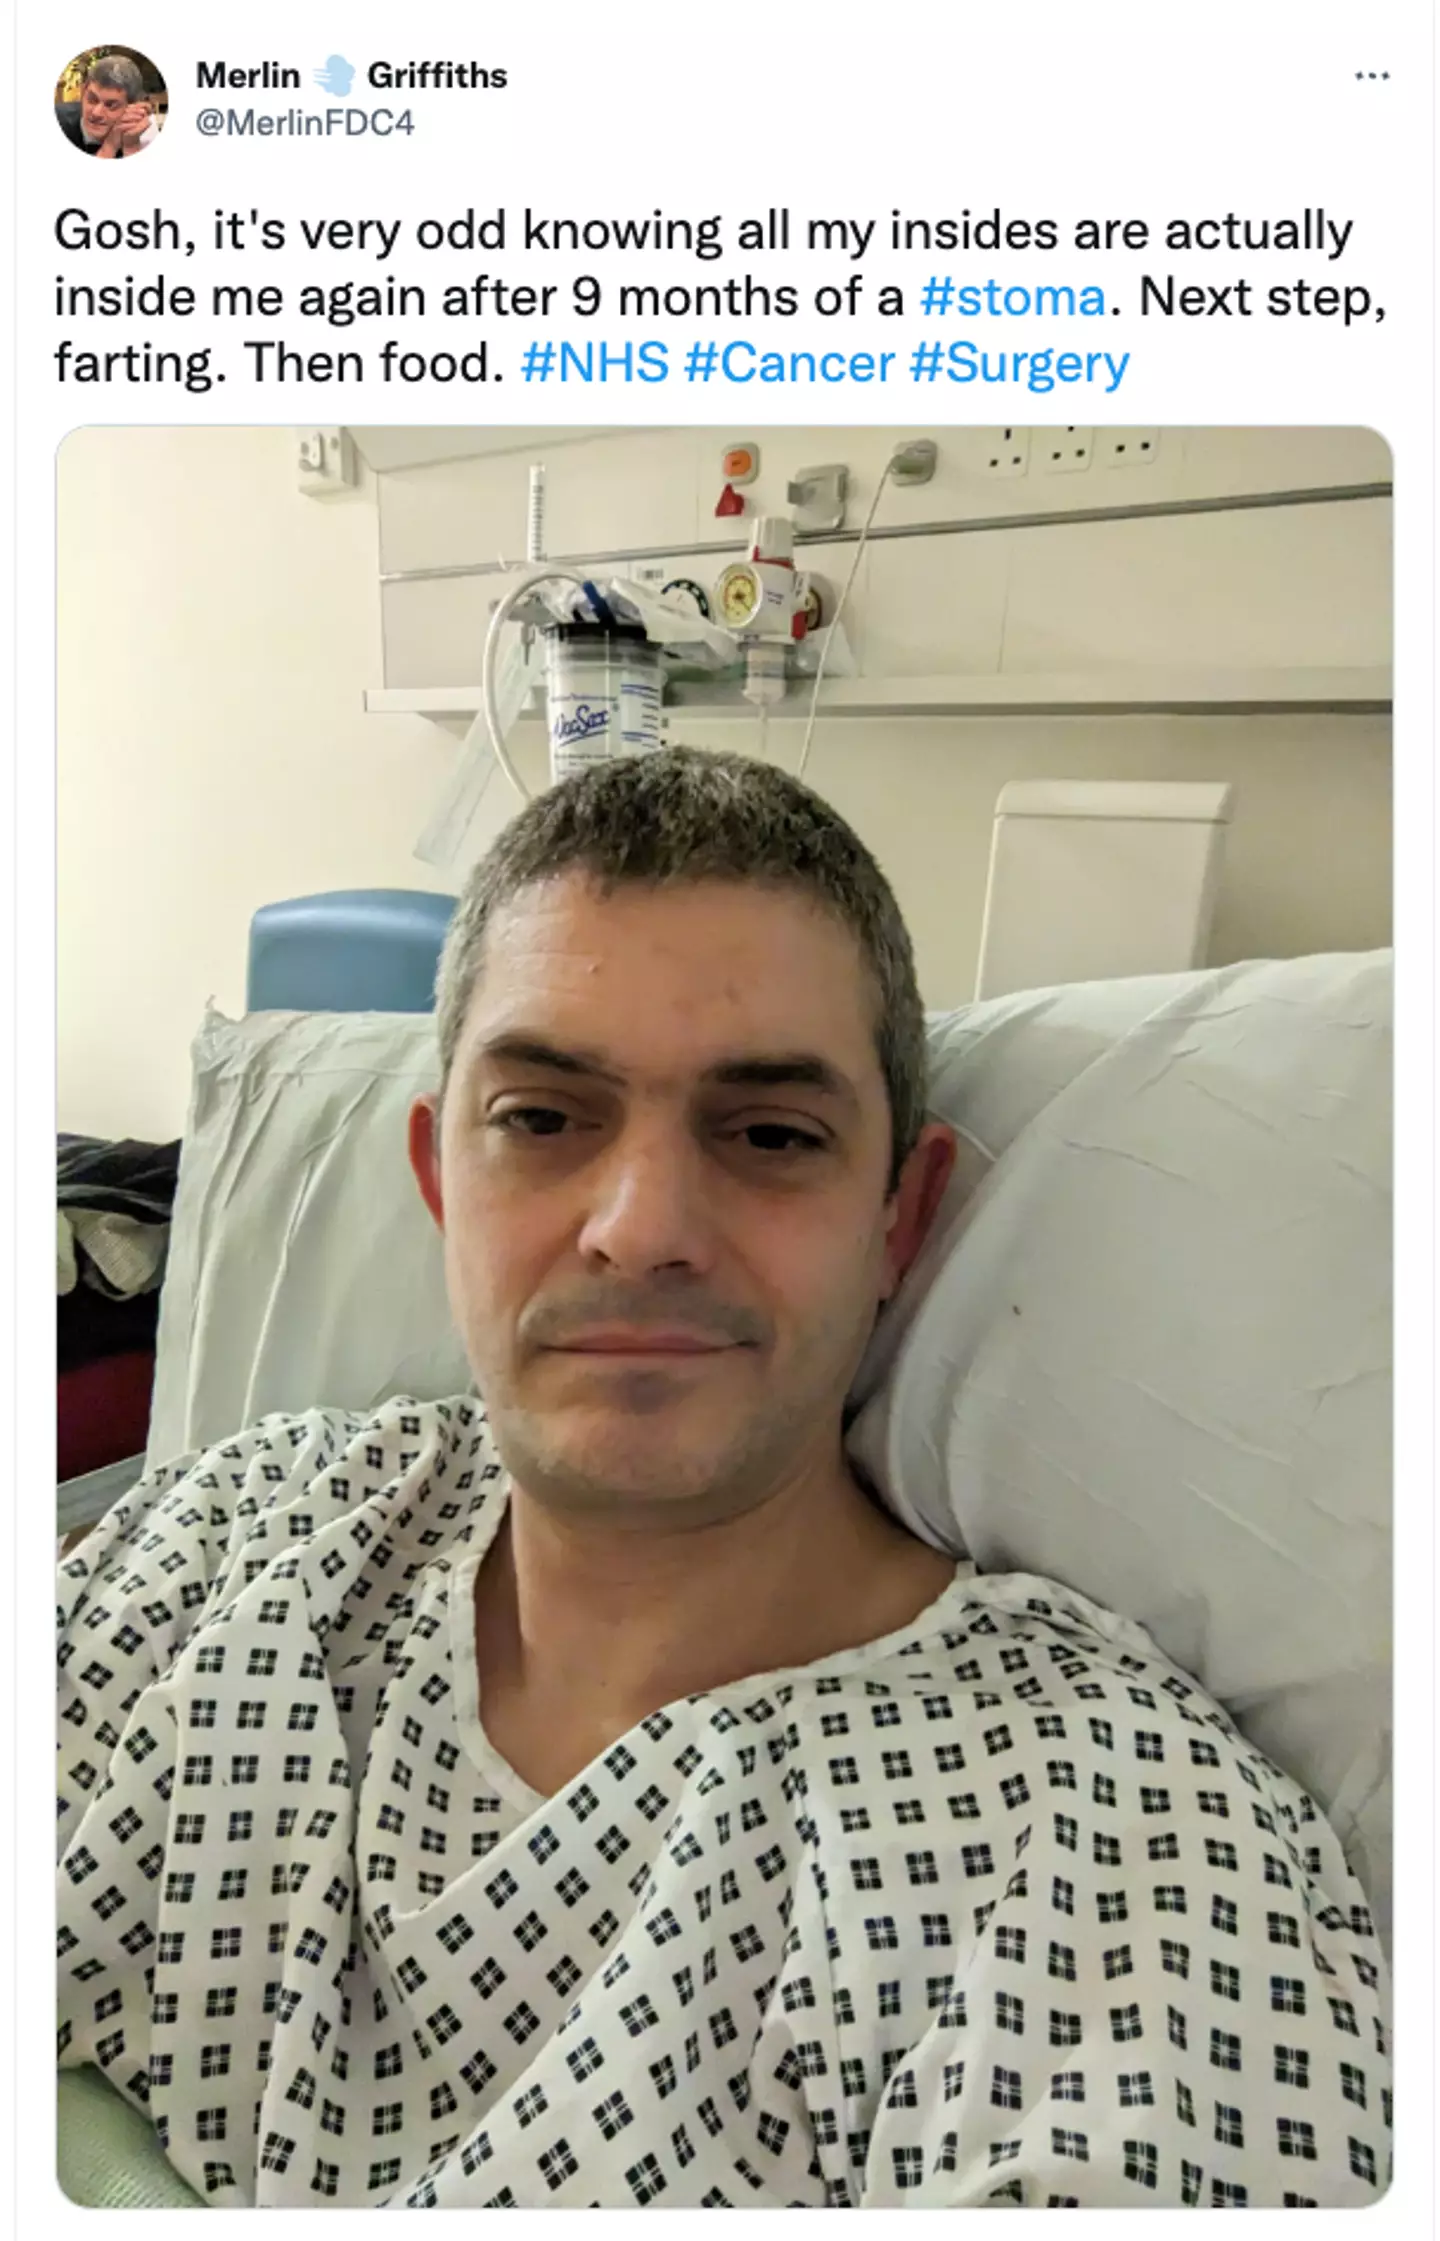 Merlin has given an update from his hospital bed.